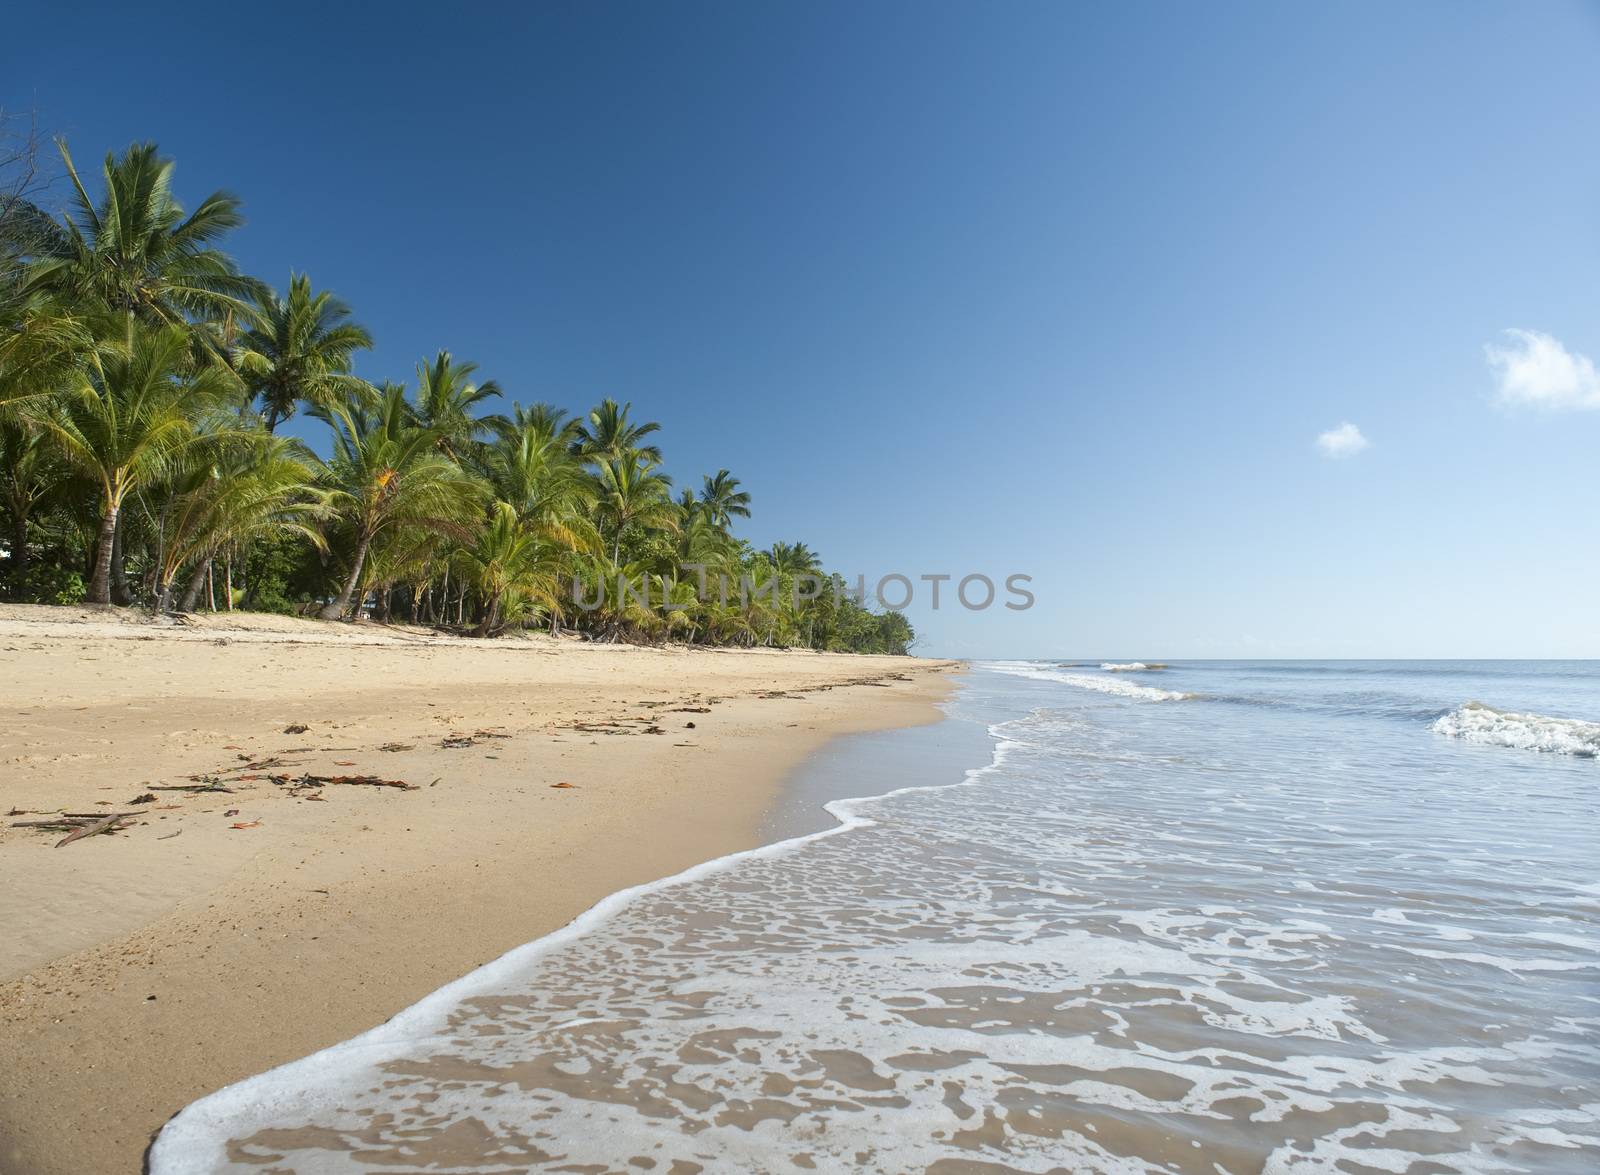 Idyllic tropical getaway at Mission Beach, Queensland, Australia with gentle surf lapping golden sand fringed with lush vegetation and palm trees